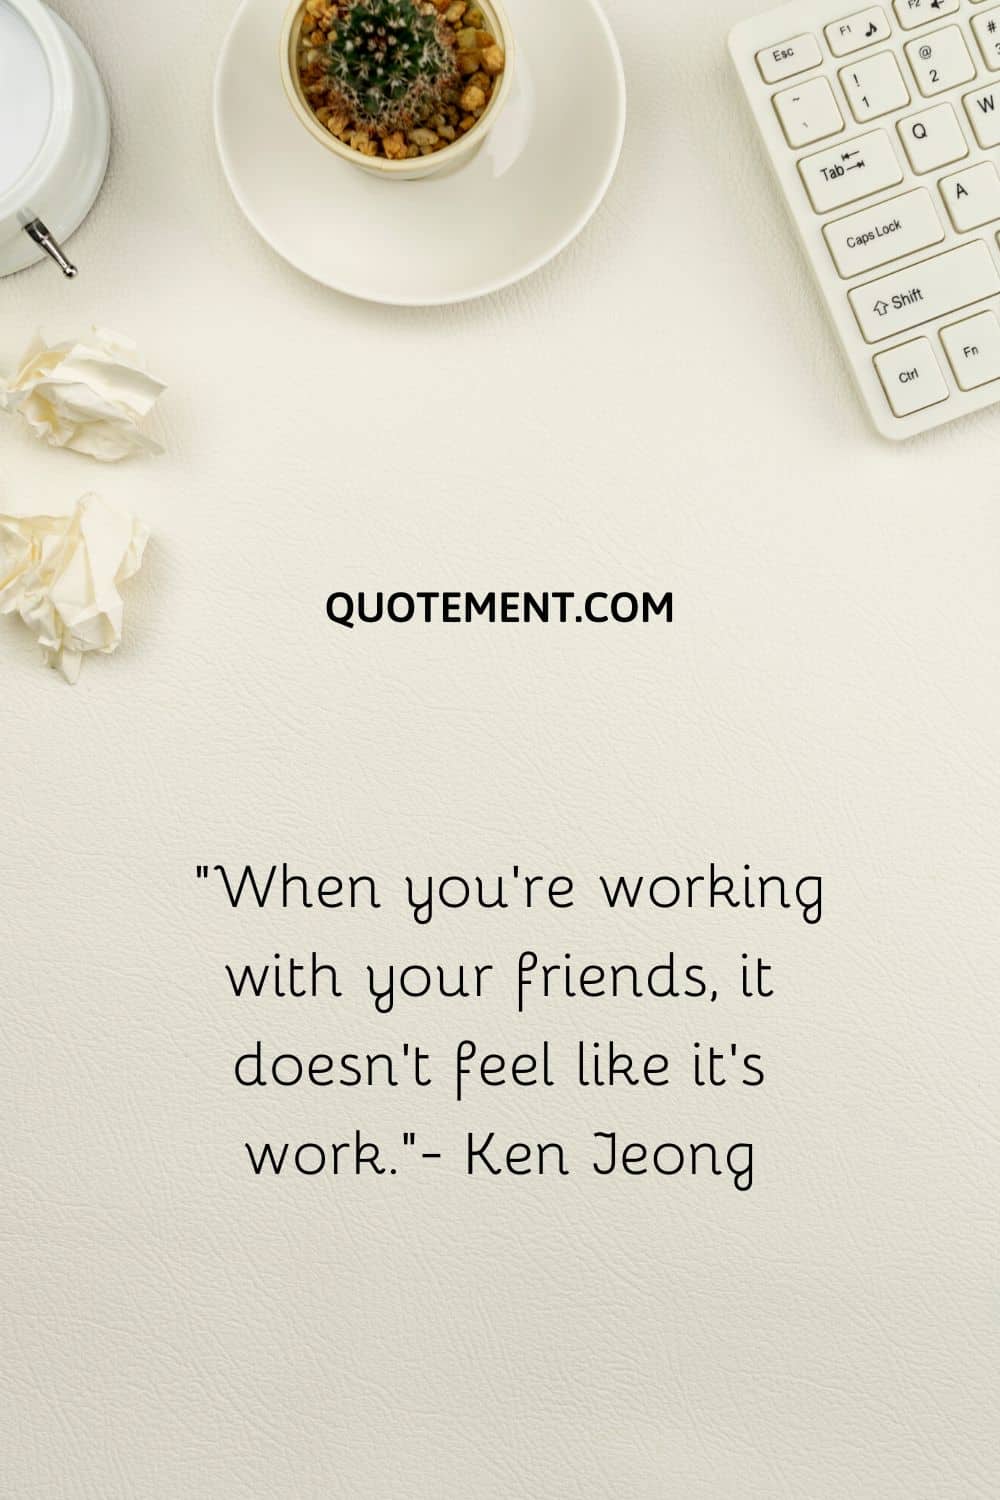 “When you’re working with your friends, it doesn’t feel like it’s work.”- Ken Jeong